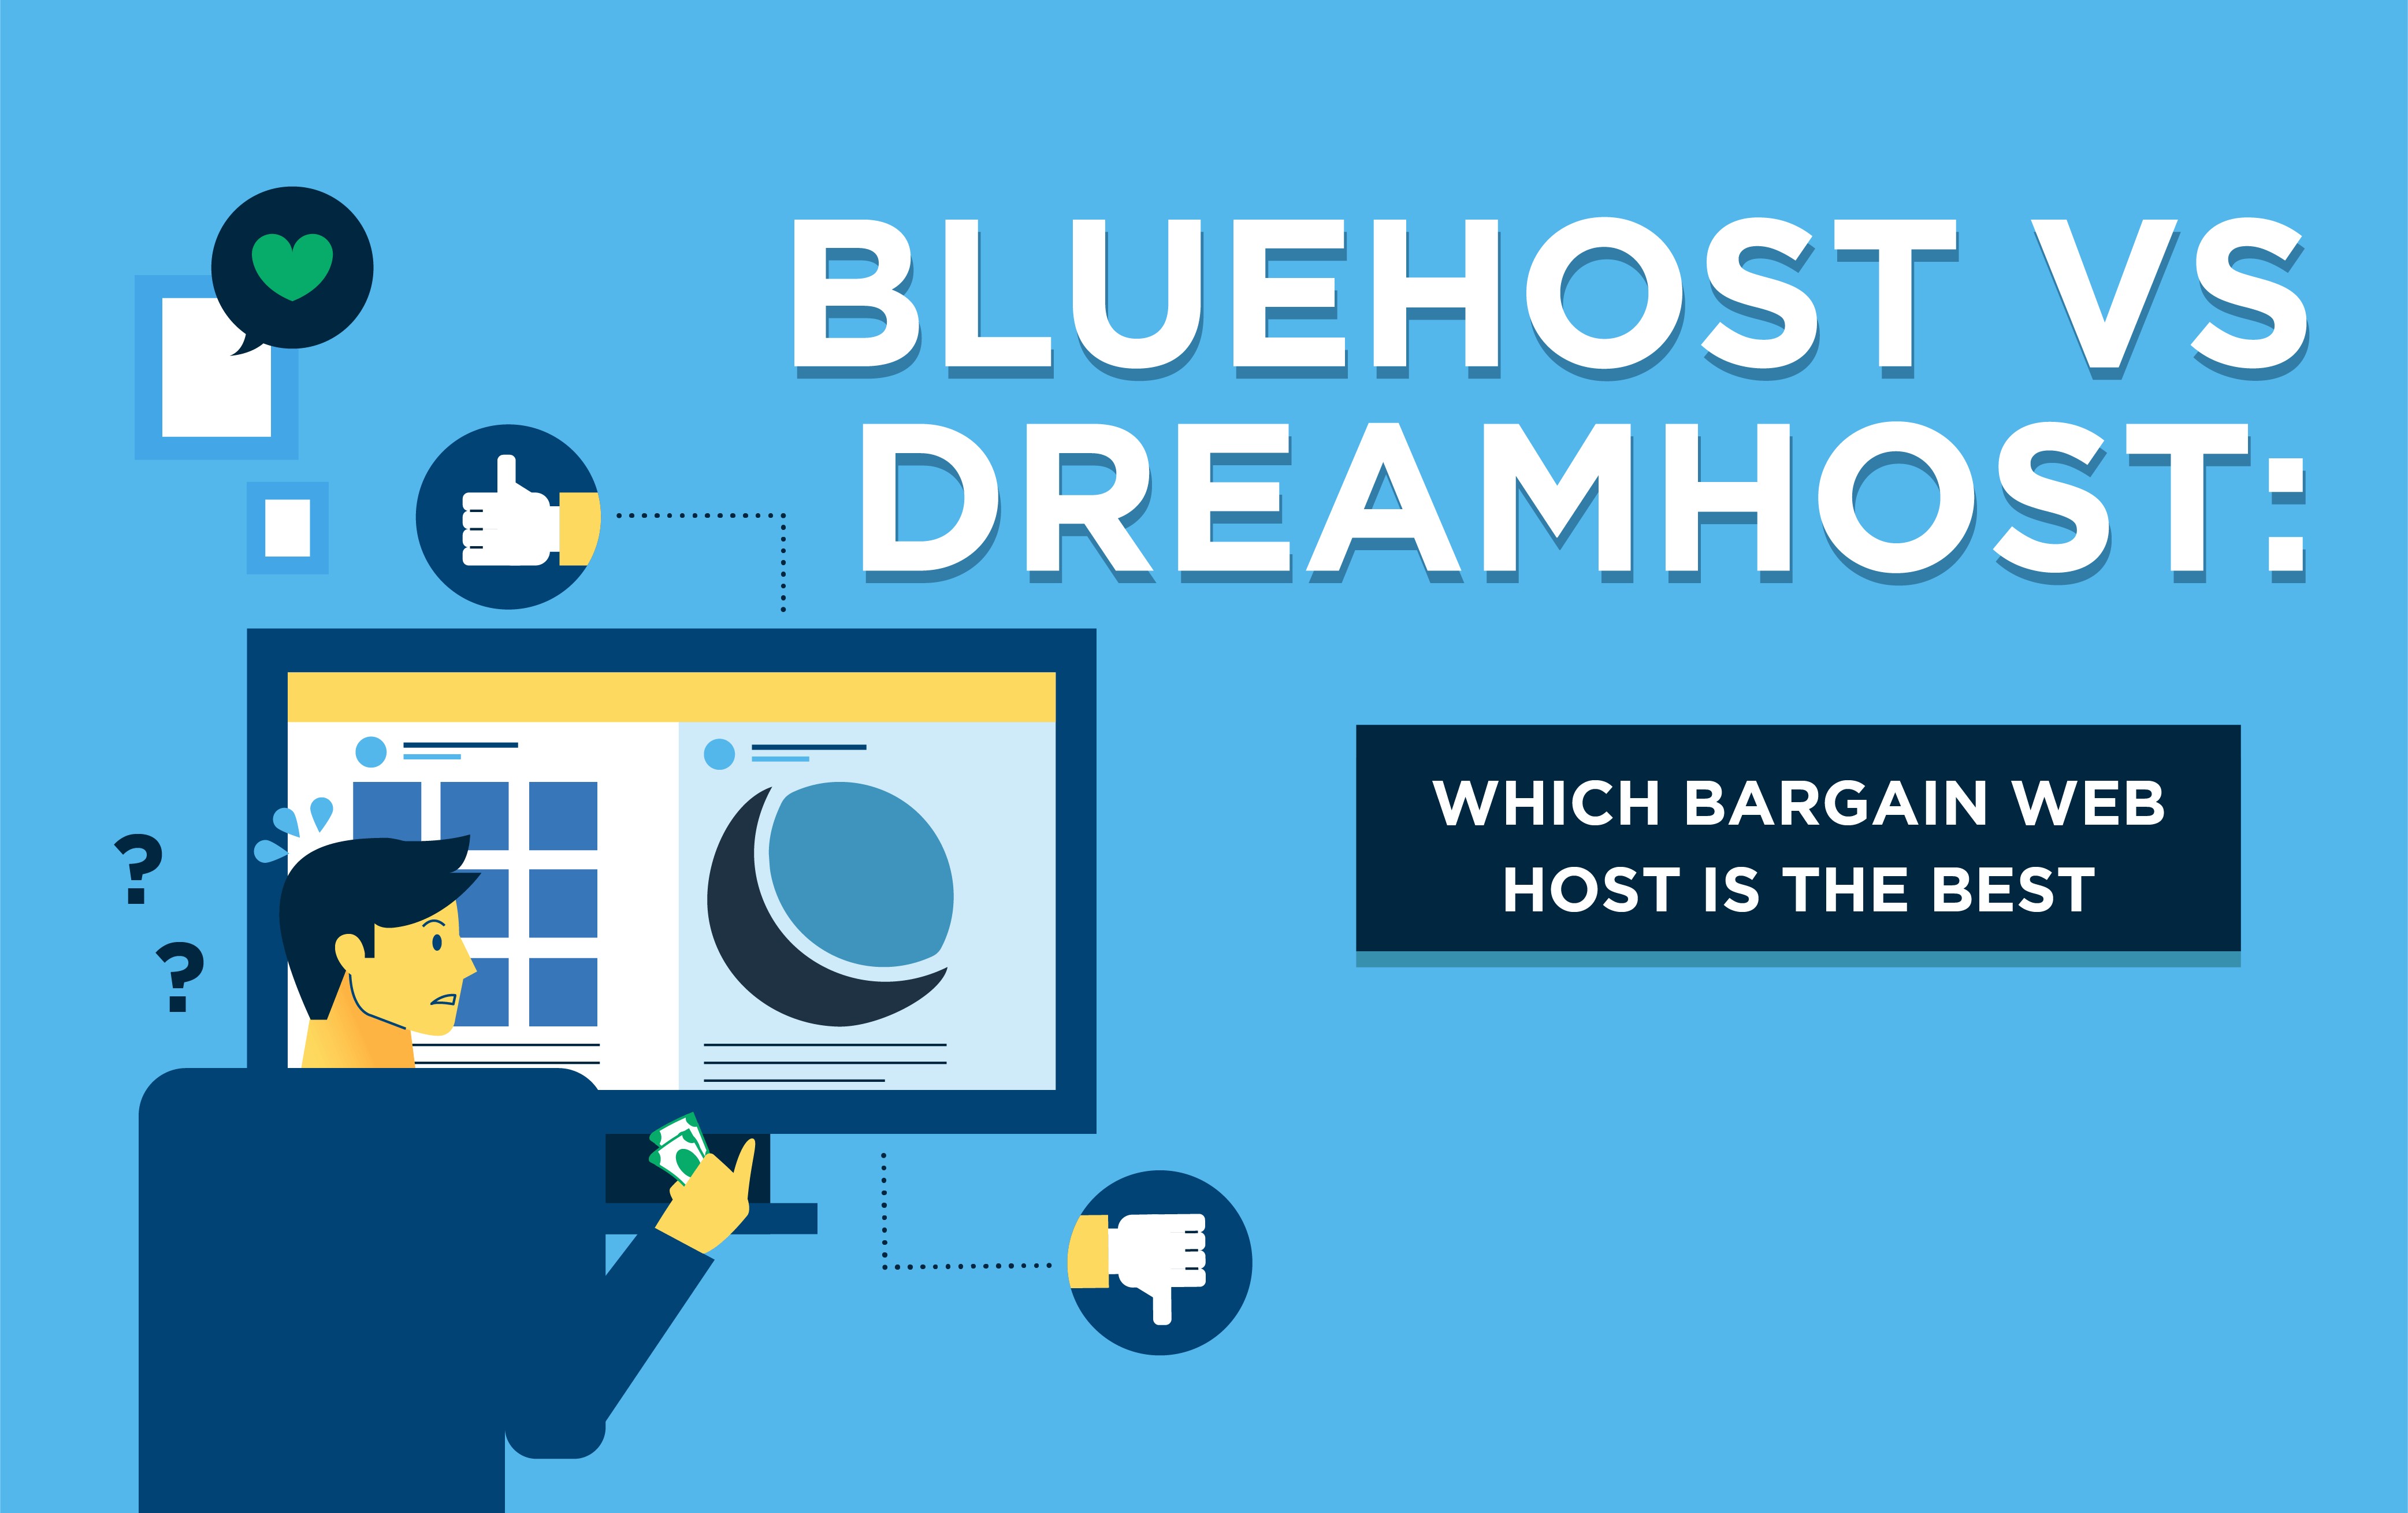 Bluehost vs Dreamhost Which Bargain Web Hosting is Best This Year